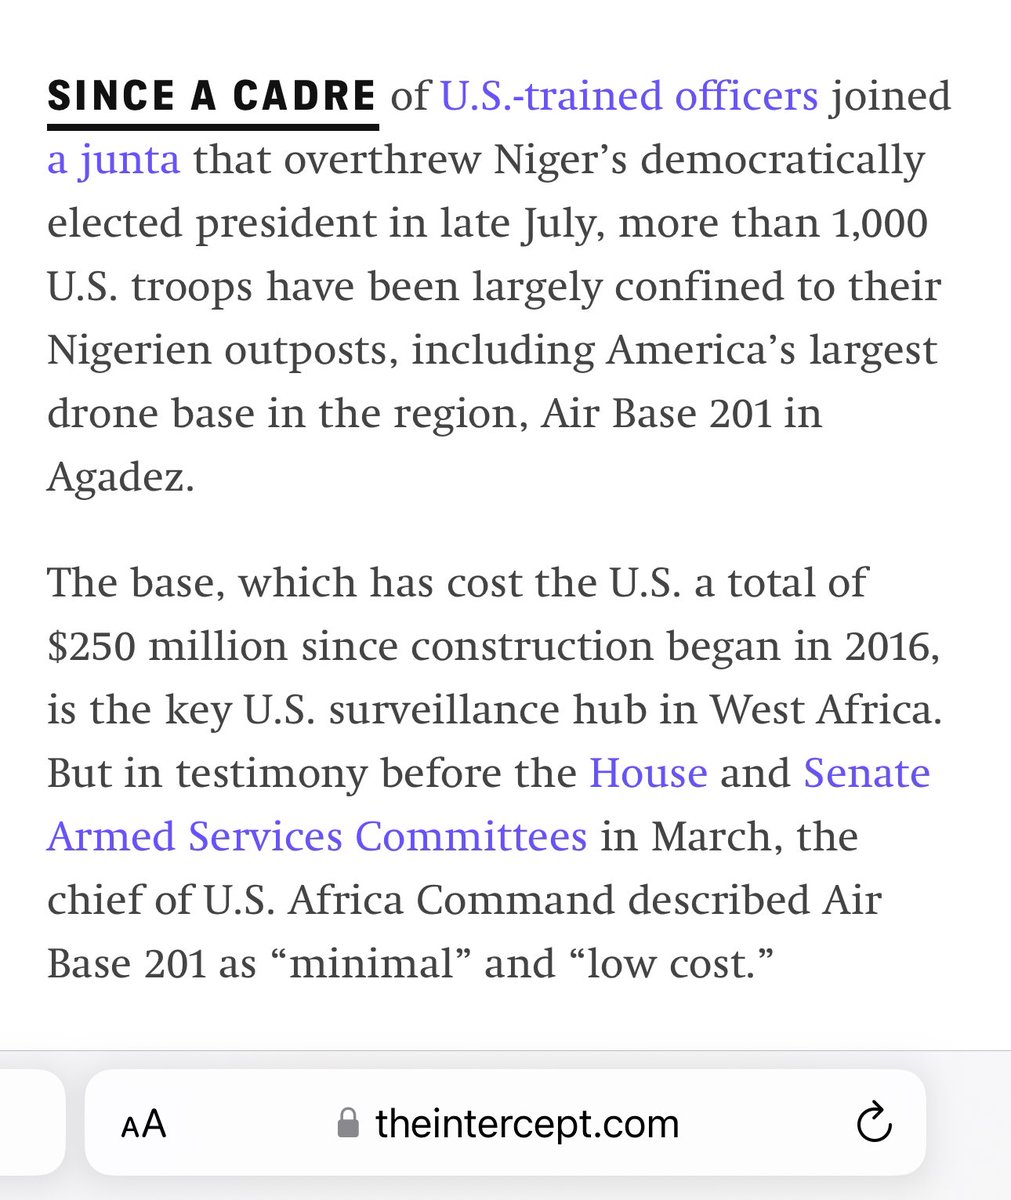 Woah. 🇺🇸 was asked to leave Niger, representing 1/5 of its bases in Africa, including a drone facility that was a key intel hub. 

Russia’s new Africa Corps already set up shop with new drone equipment.